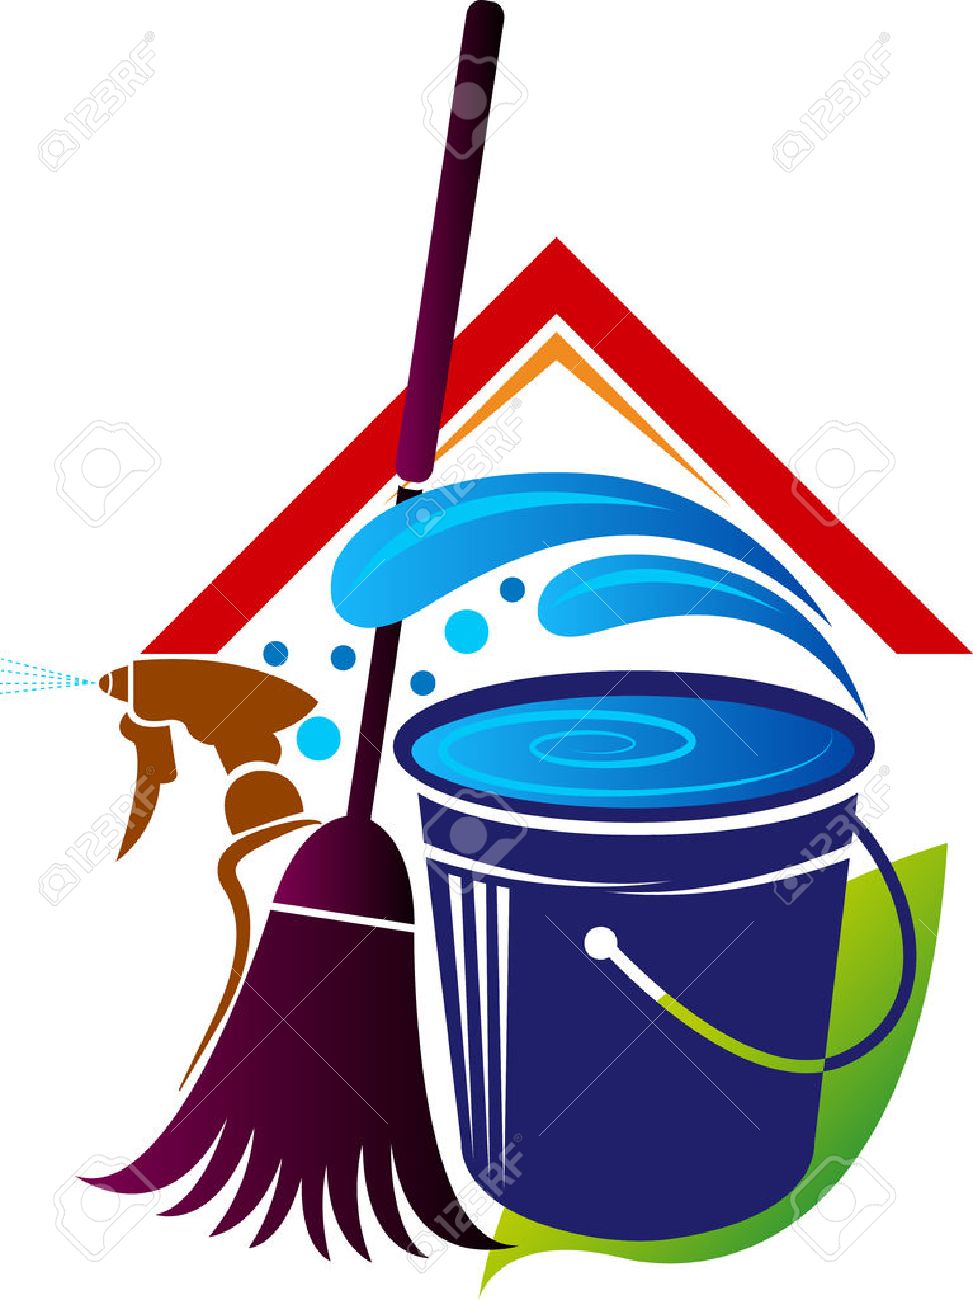 1,847 Purifier Stock Vector Illustration And Royalty Free Purifier.